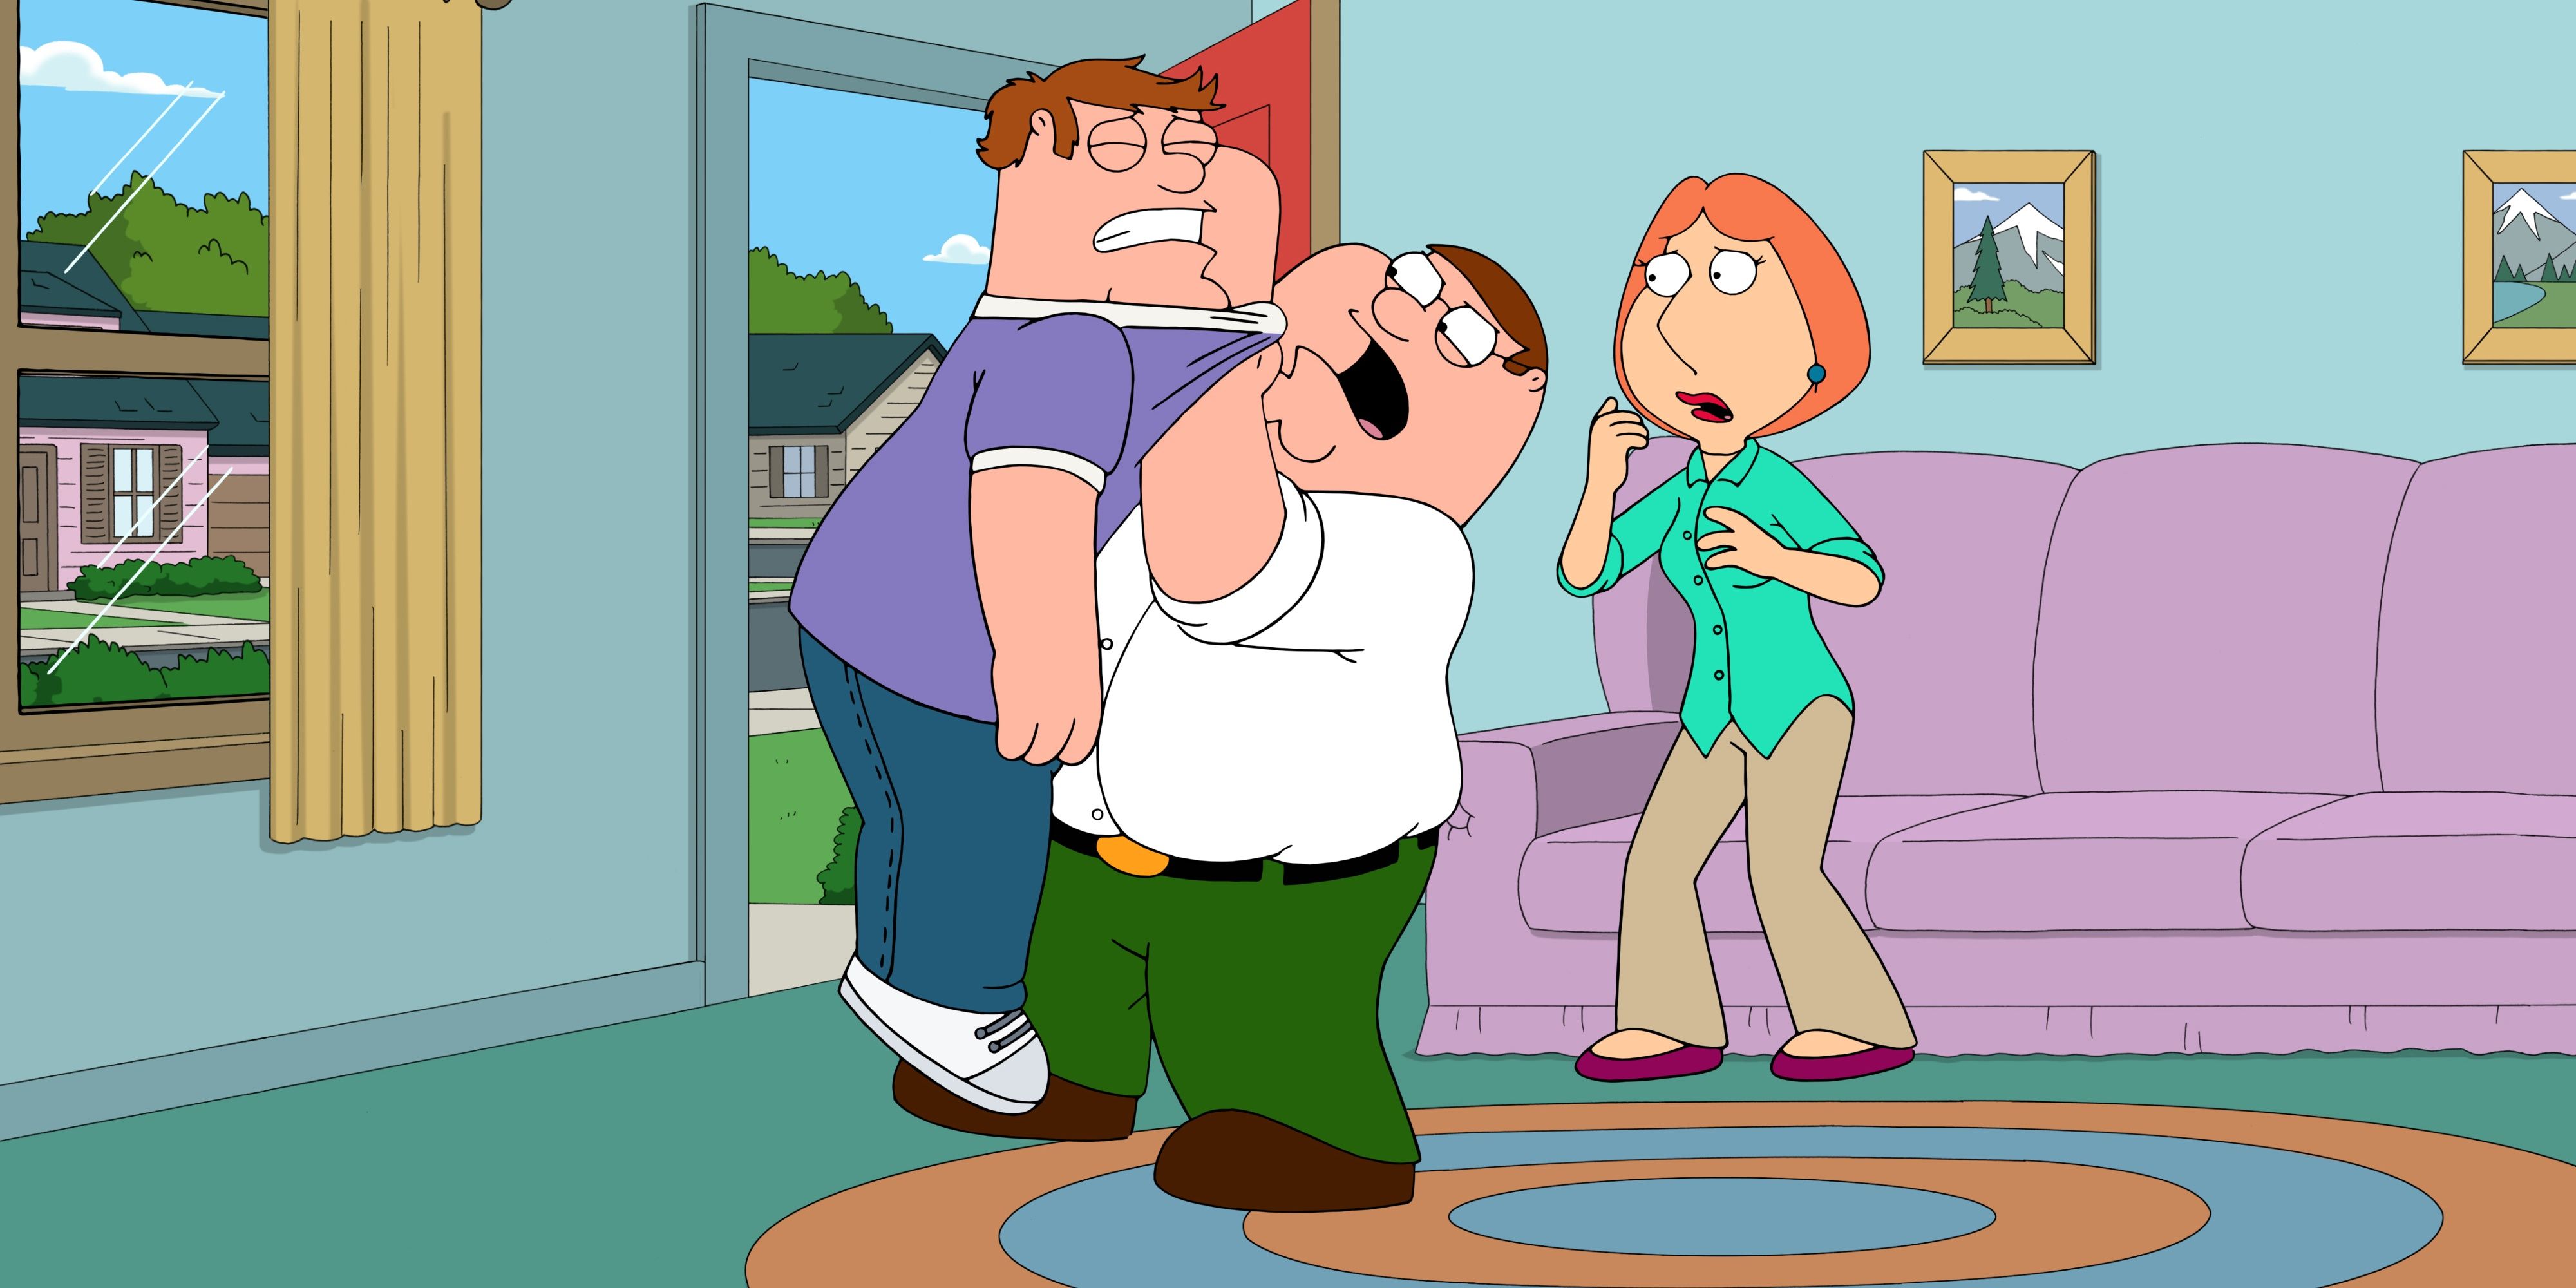 Peter fights with his son Larry in Family Guy